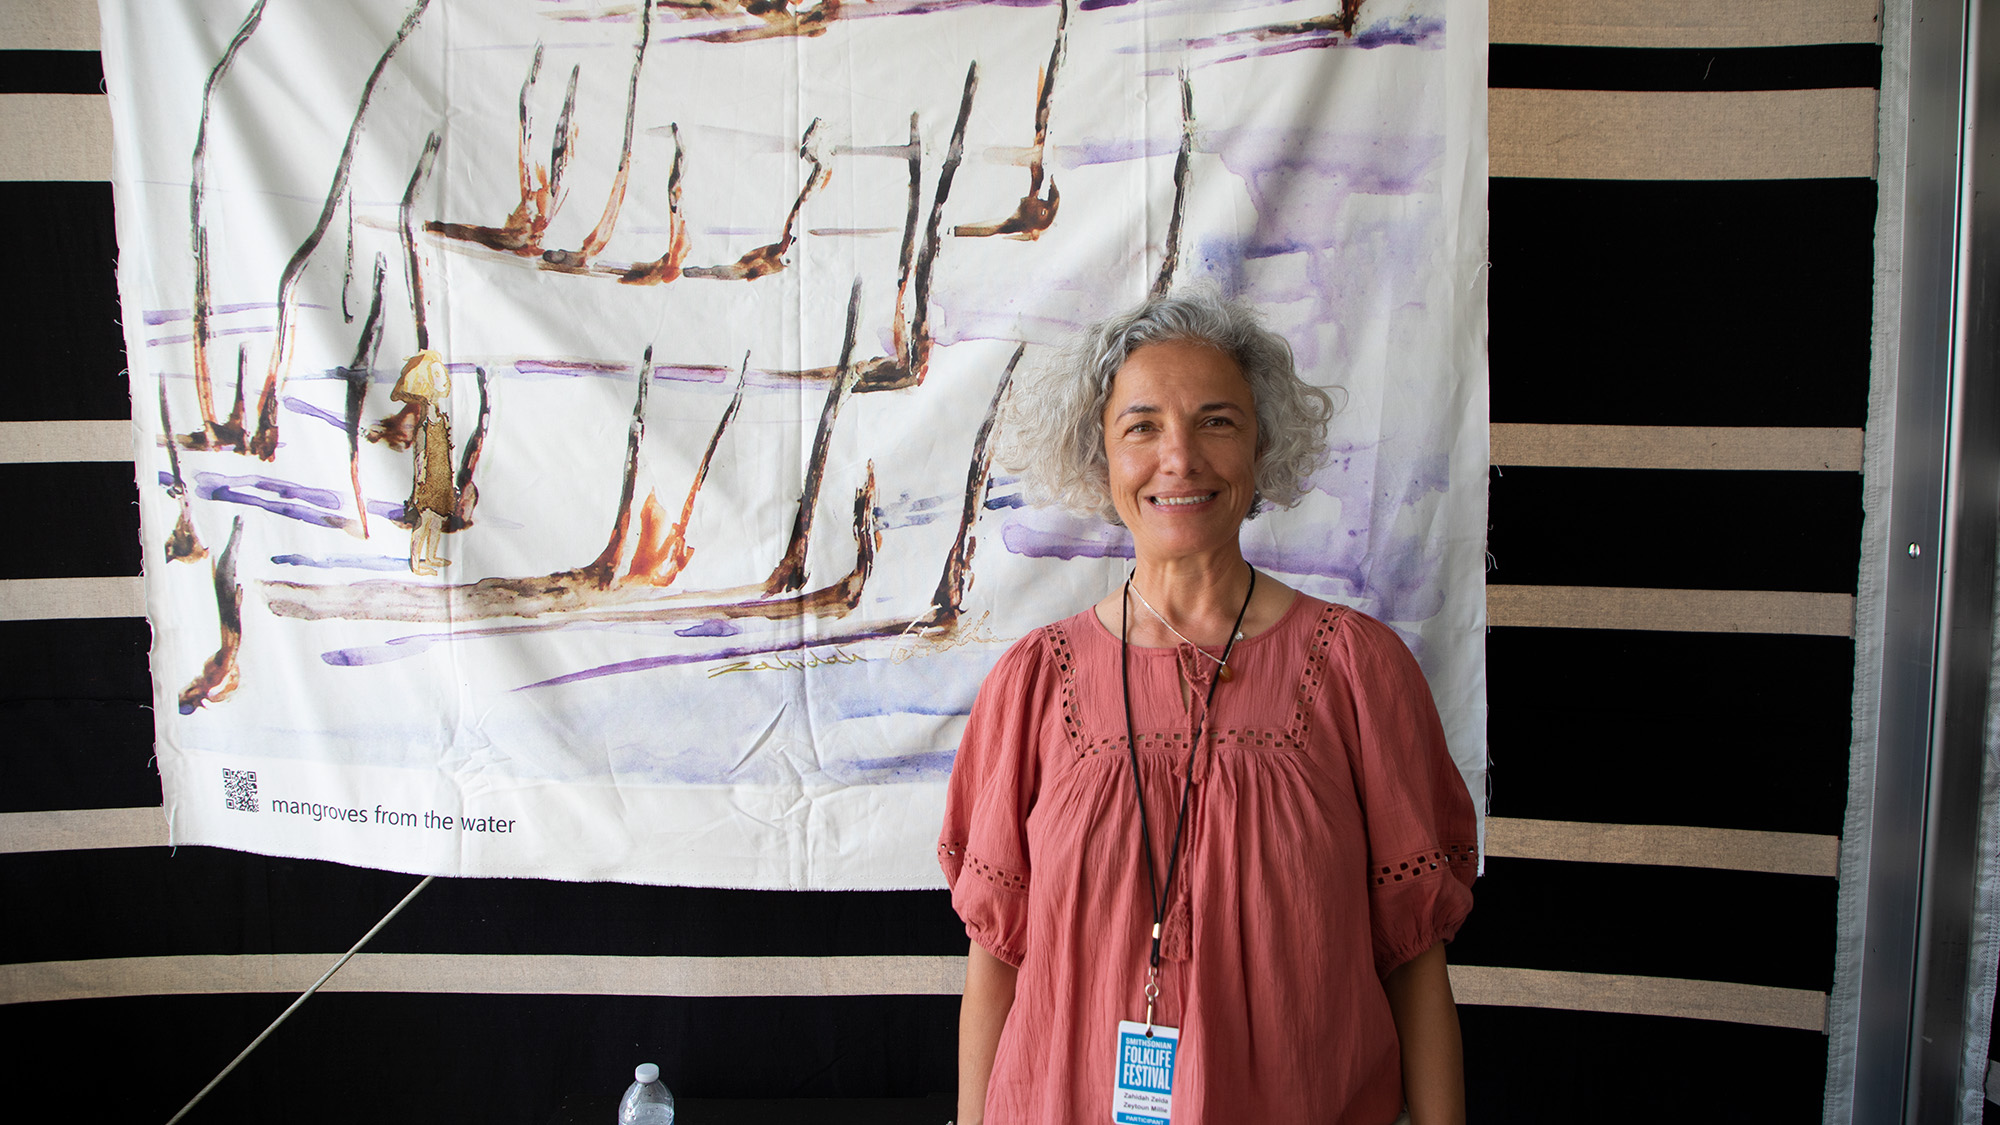 Zahidah Zeytoun Millie smiling in front of a large canvas that she painted with mangrove trees